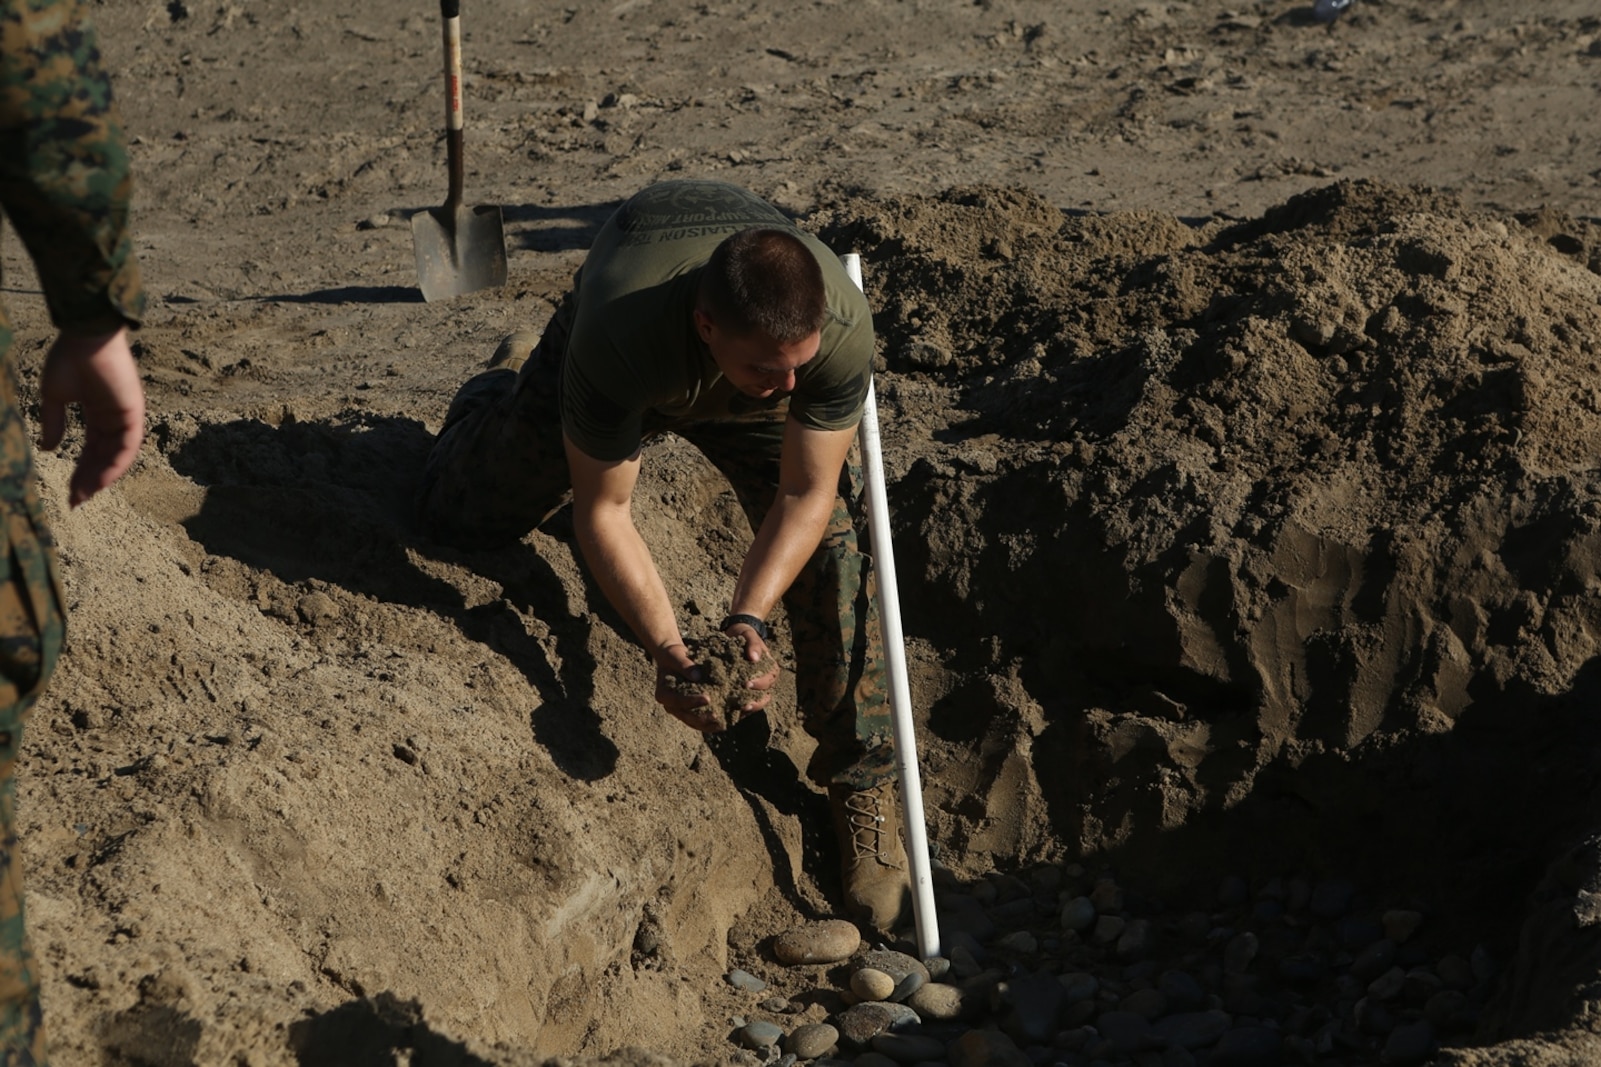 U.S. Navy Petty Officer 2nd Class Michael Mathews helps to set up a grey water sanitation soakage pit during Preventative Medicine Exercise 2016 at Camp Pendleton, Calif., Nov. 10, 2016. The pit is 5 feet long, 5 feet wide, and 5 feet deep filled with small rocks and pipes to safely transfer waste to the ground. Grey water is any substance that could potentially be harmful to the environment and special precautions are made to keep the exercise’s area safe. Matthews is a preventive medical technician with 1st Medical Battalion, 1st Marine Logistics Group. (U.S. Marine Corps photo by Lance Cpl. Joseph Sorci)